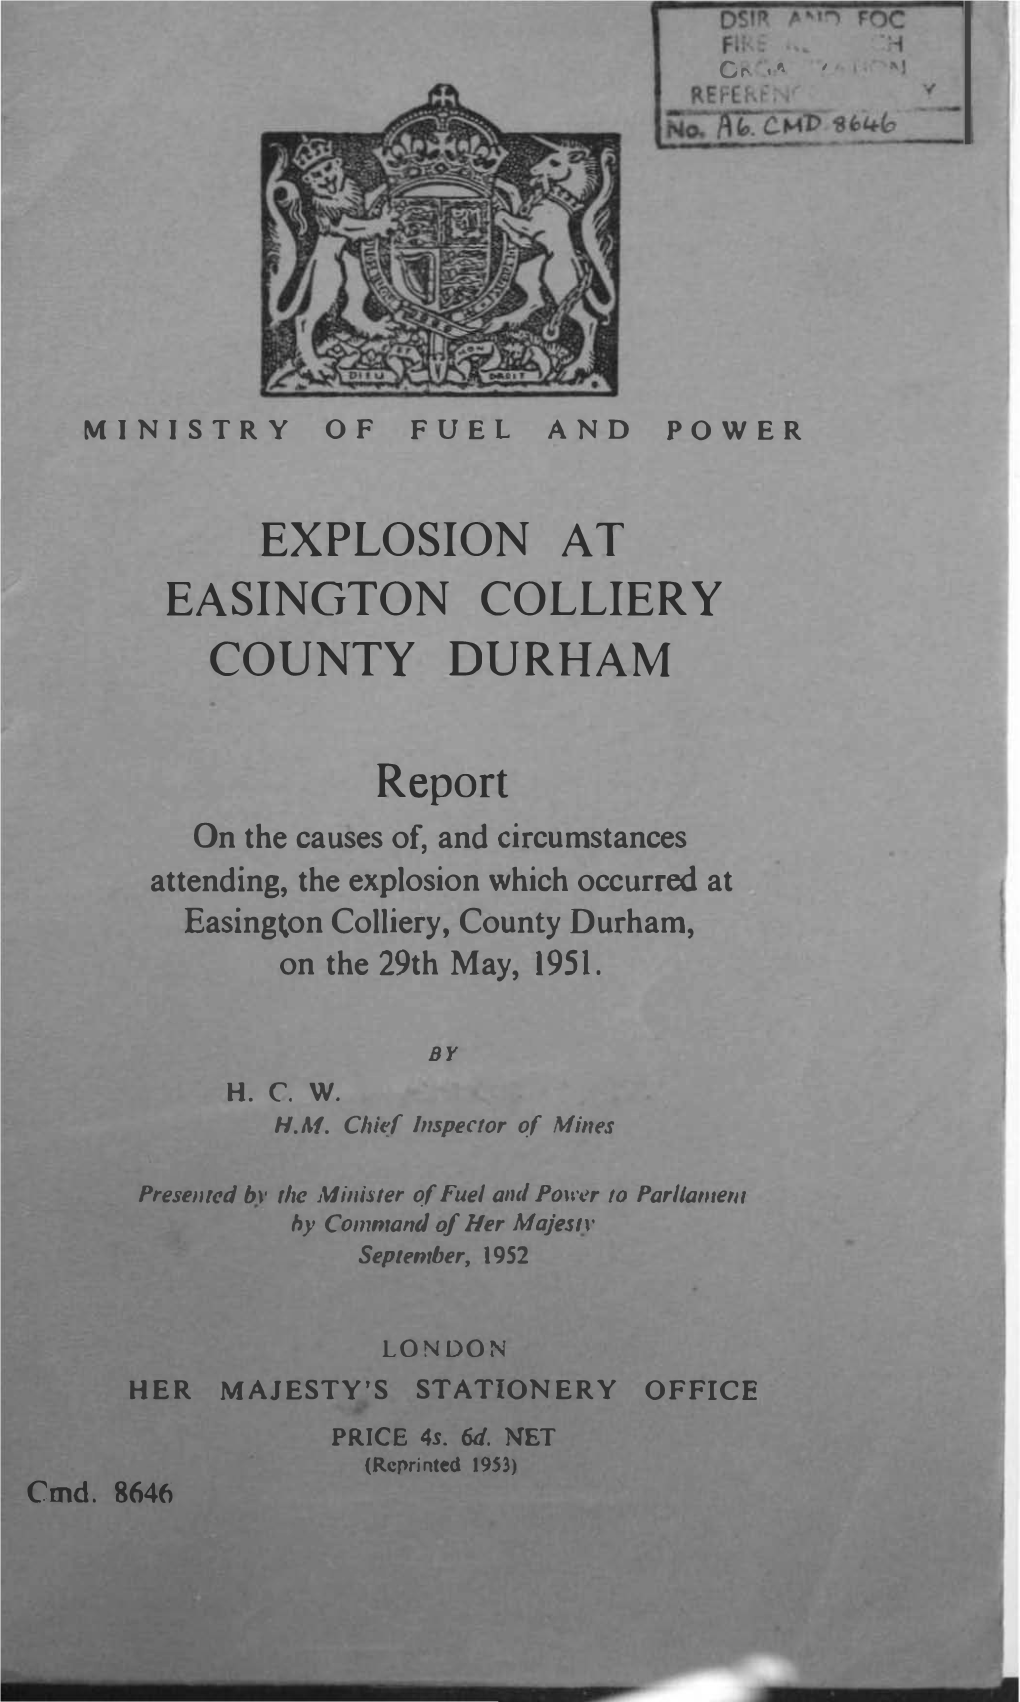 REI [:,;.' EXPLOSION at EASINGTON COLLIERY COUNTY DURHAM Report